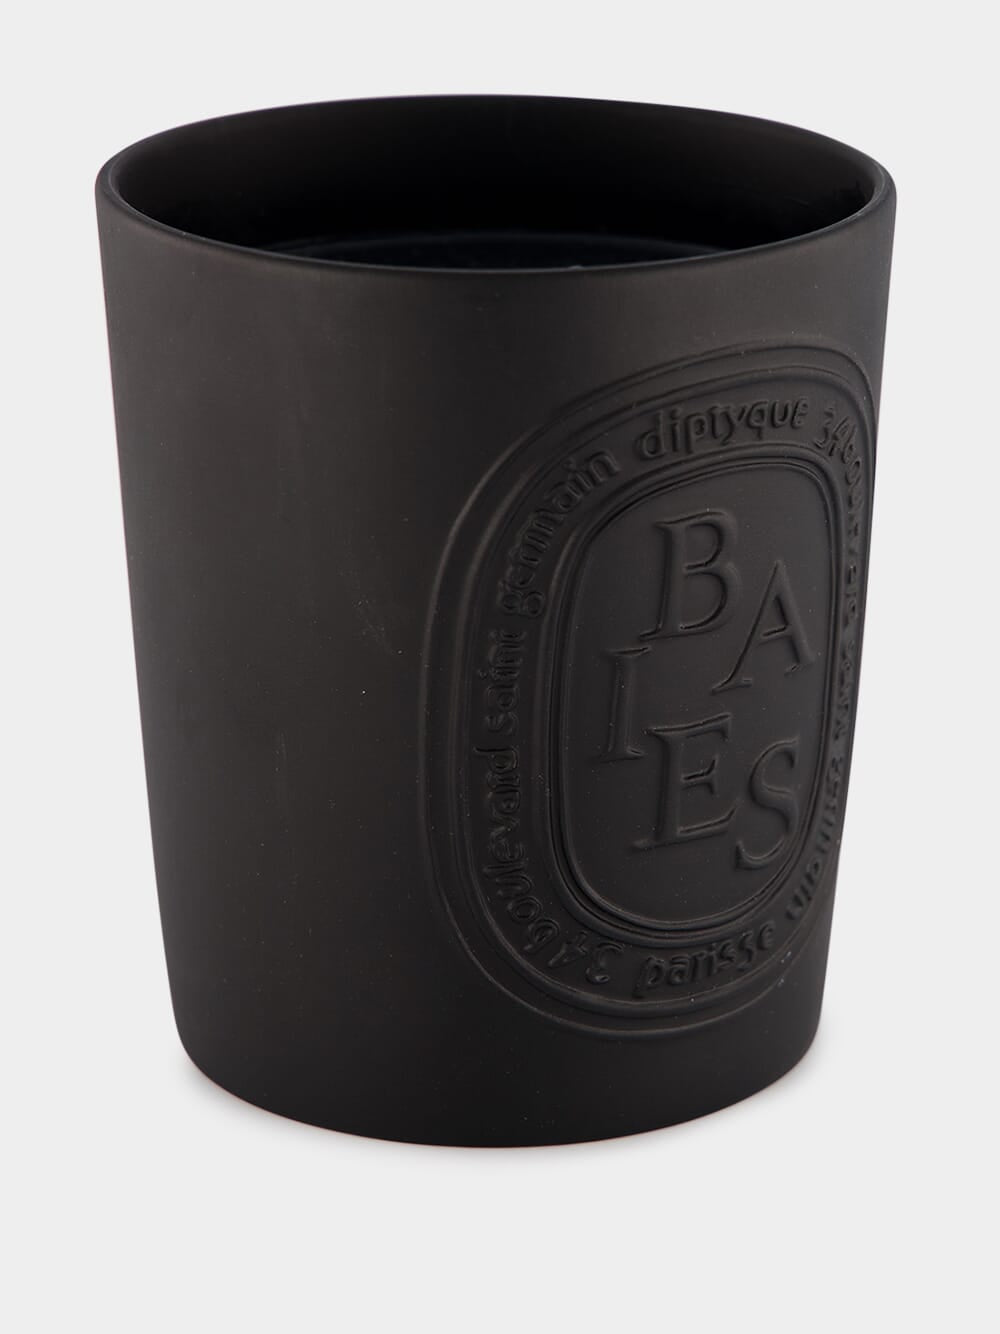 DiptyqueBaies Black Candle 600g at Fashion Clinic